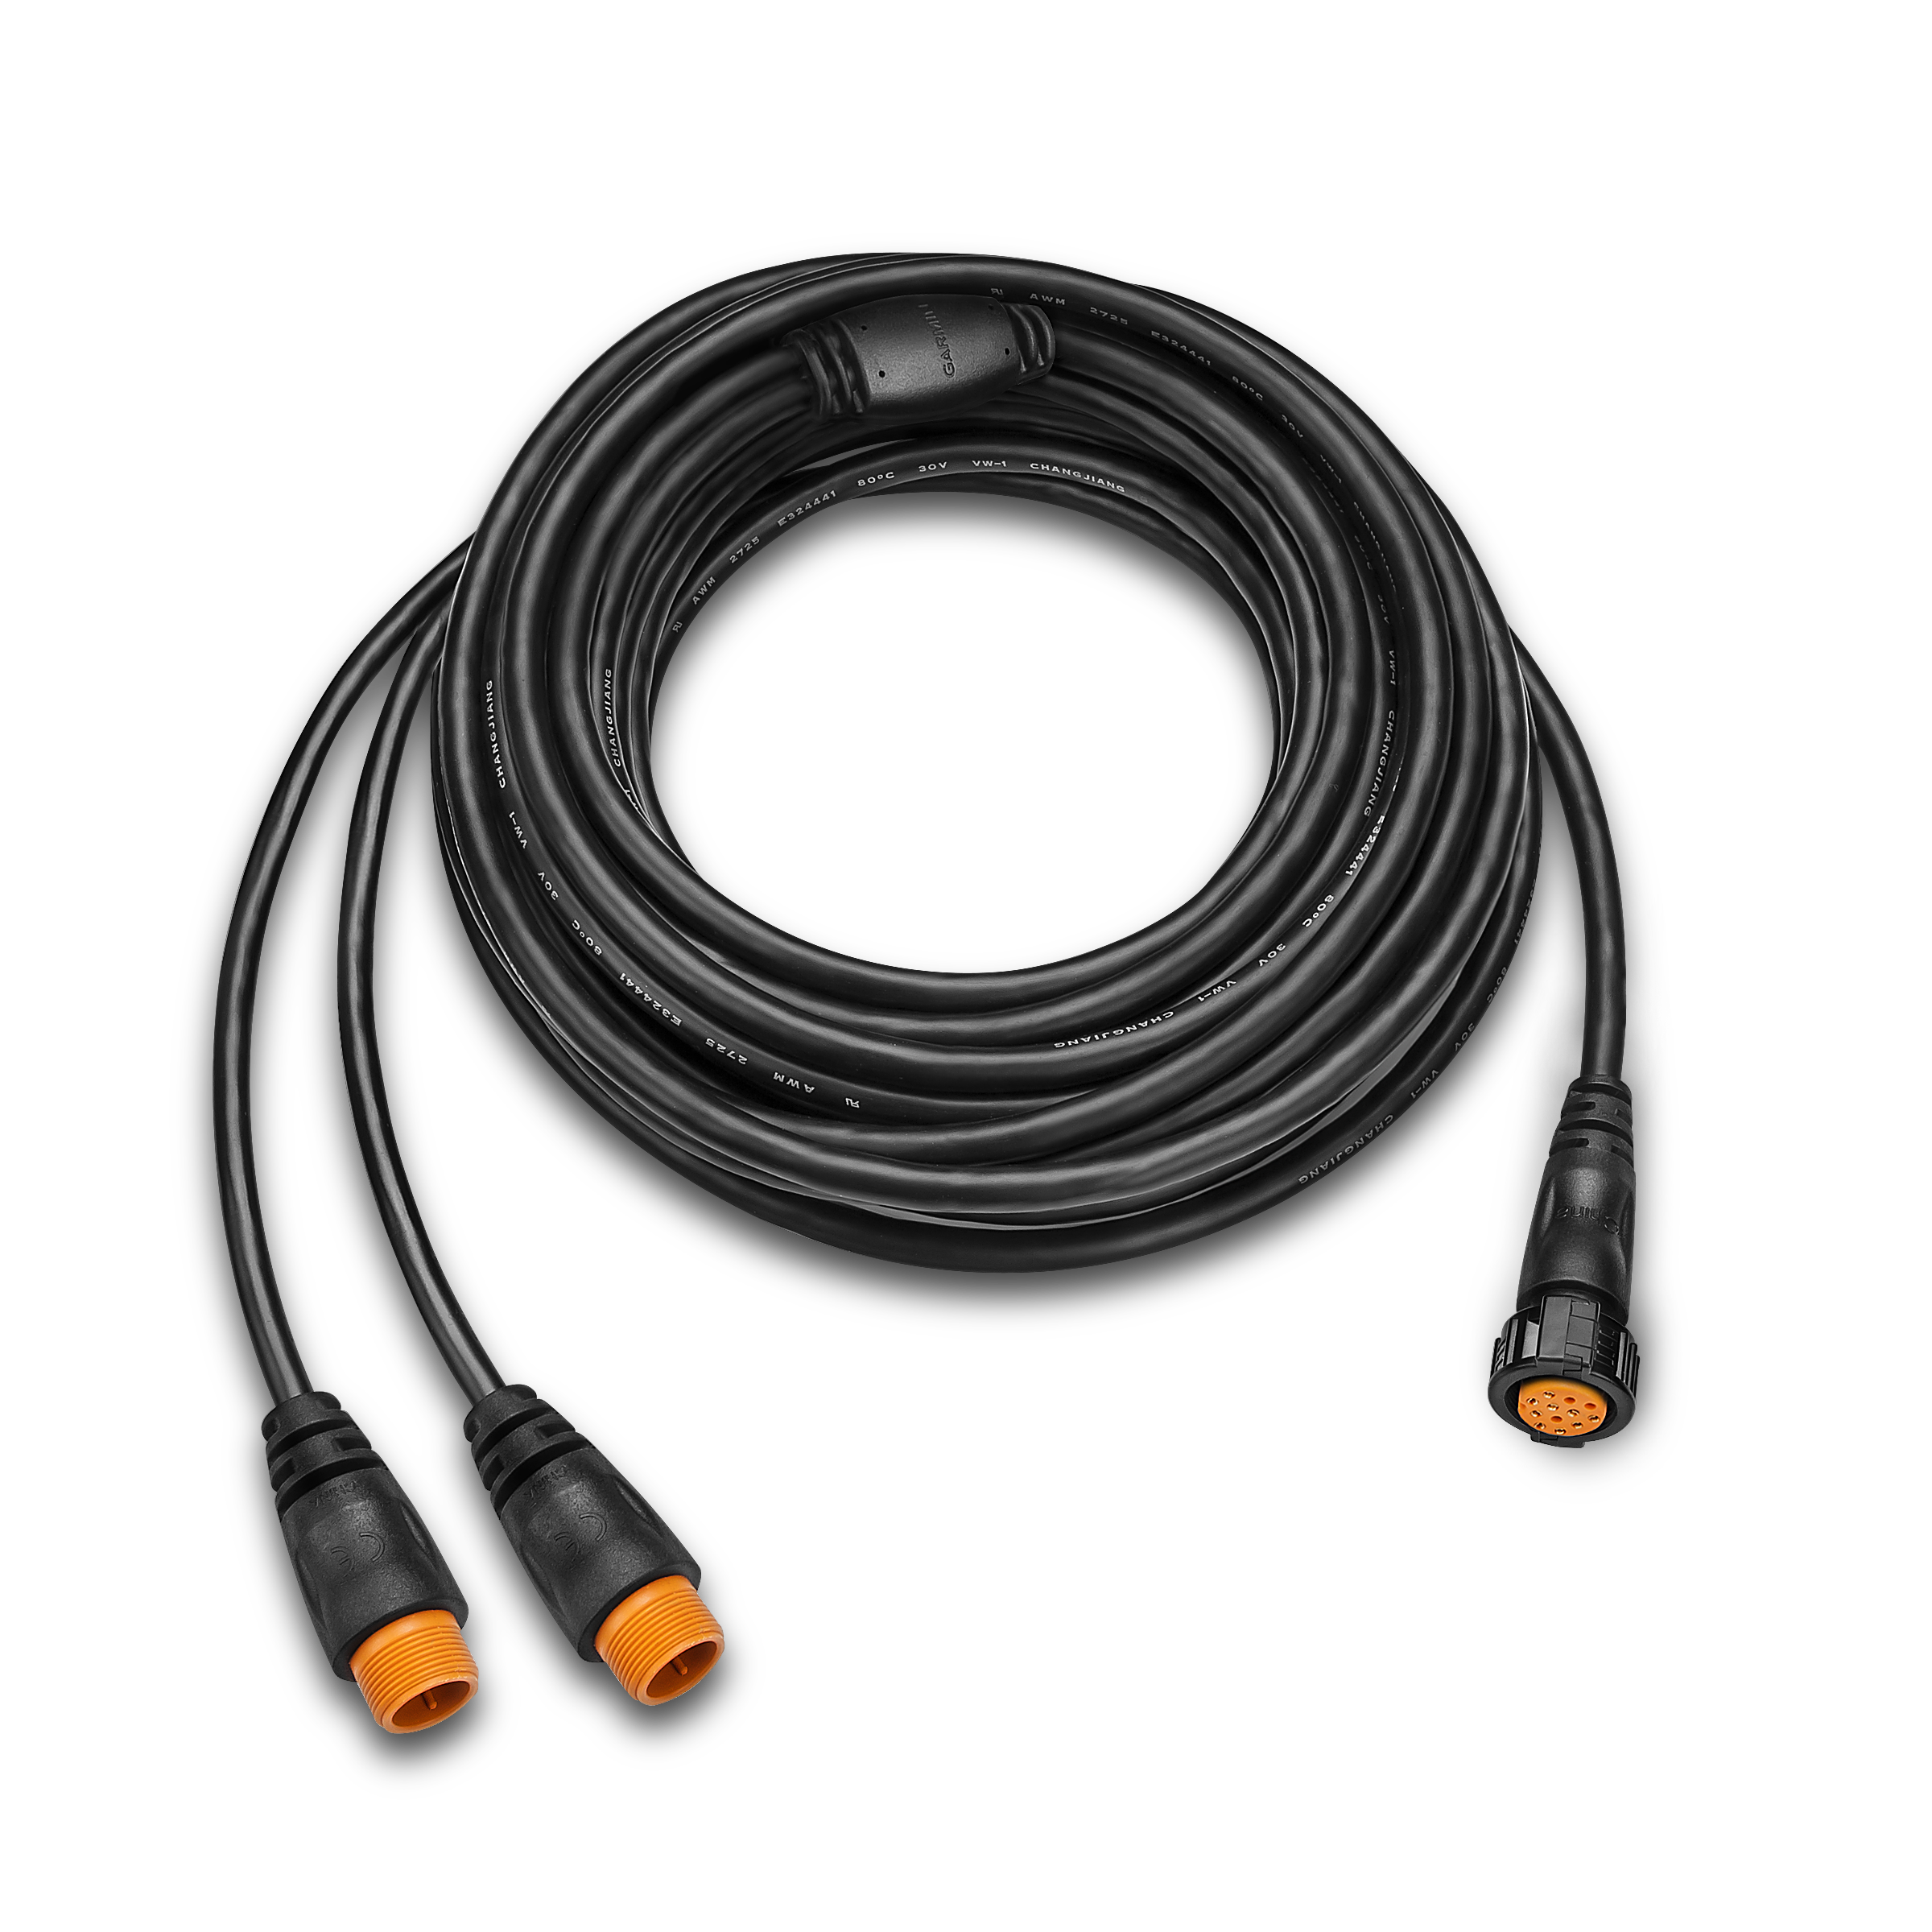 Garmin 12-pin transducer Y-cable, 10 m (32.8 ft) 